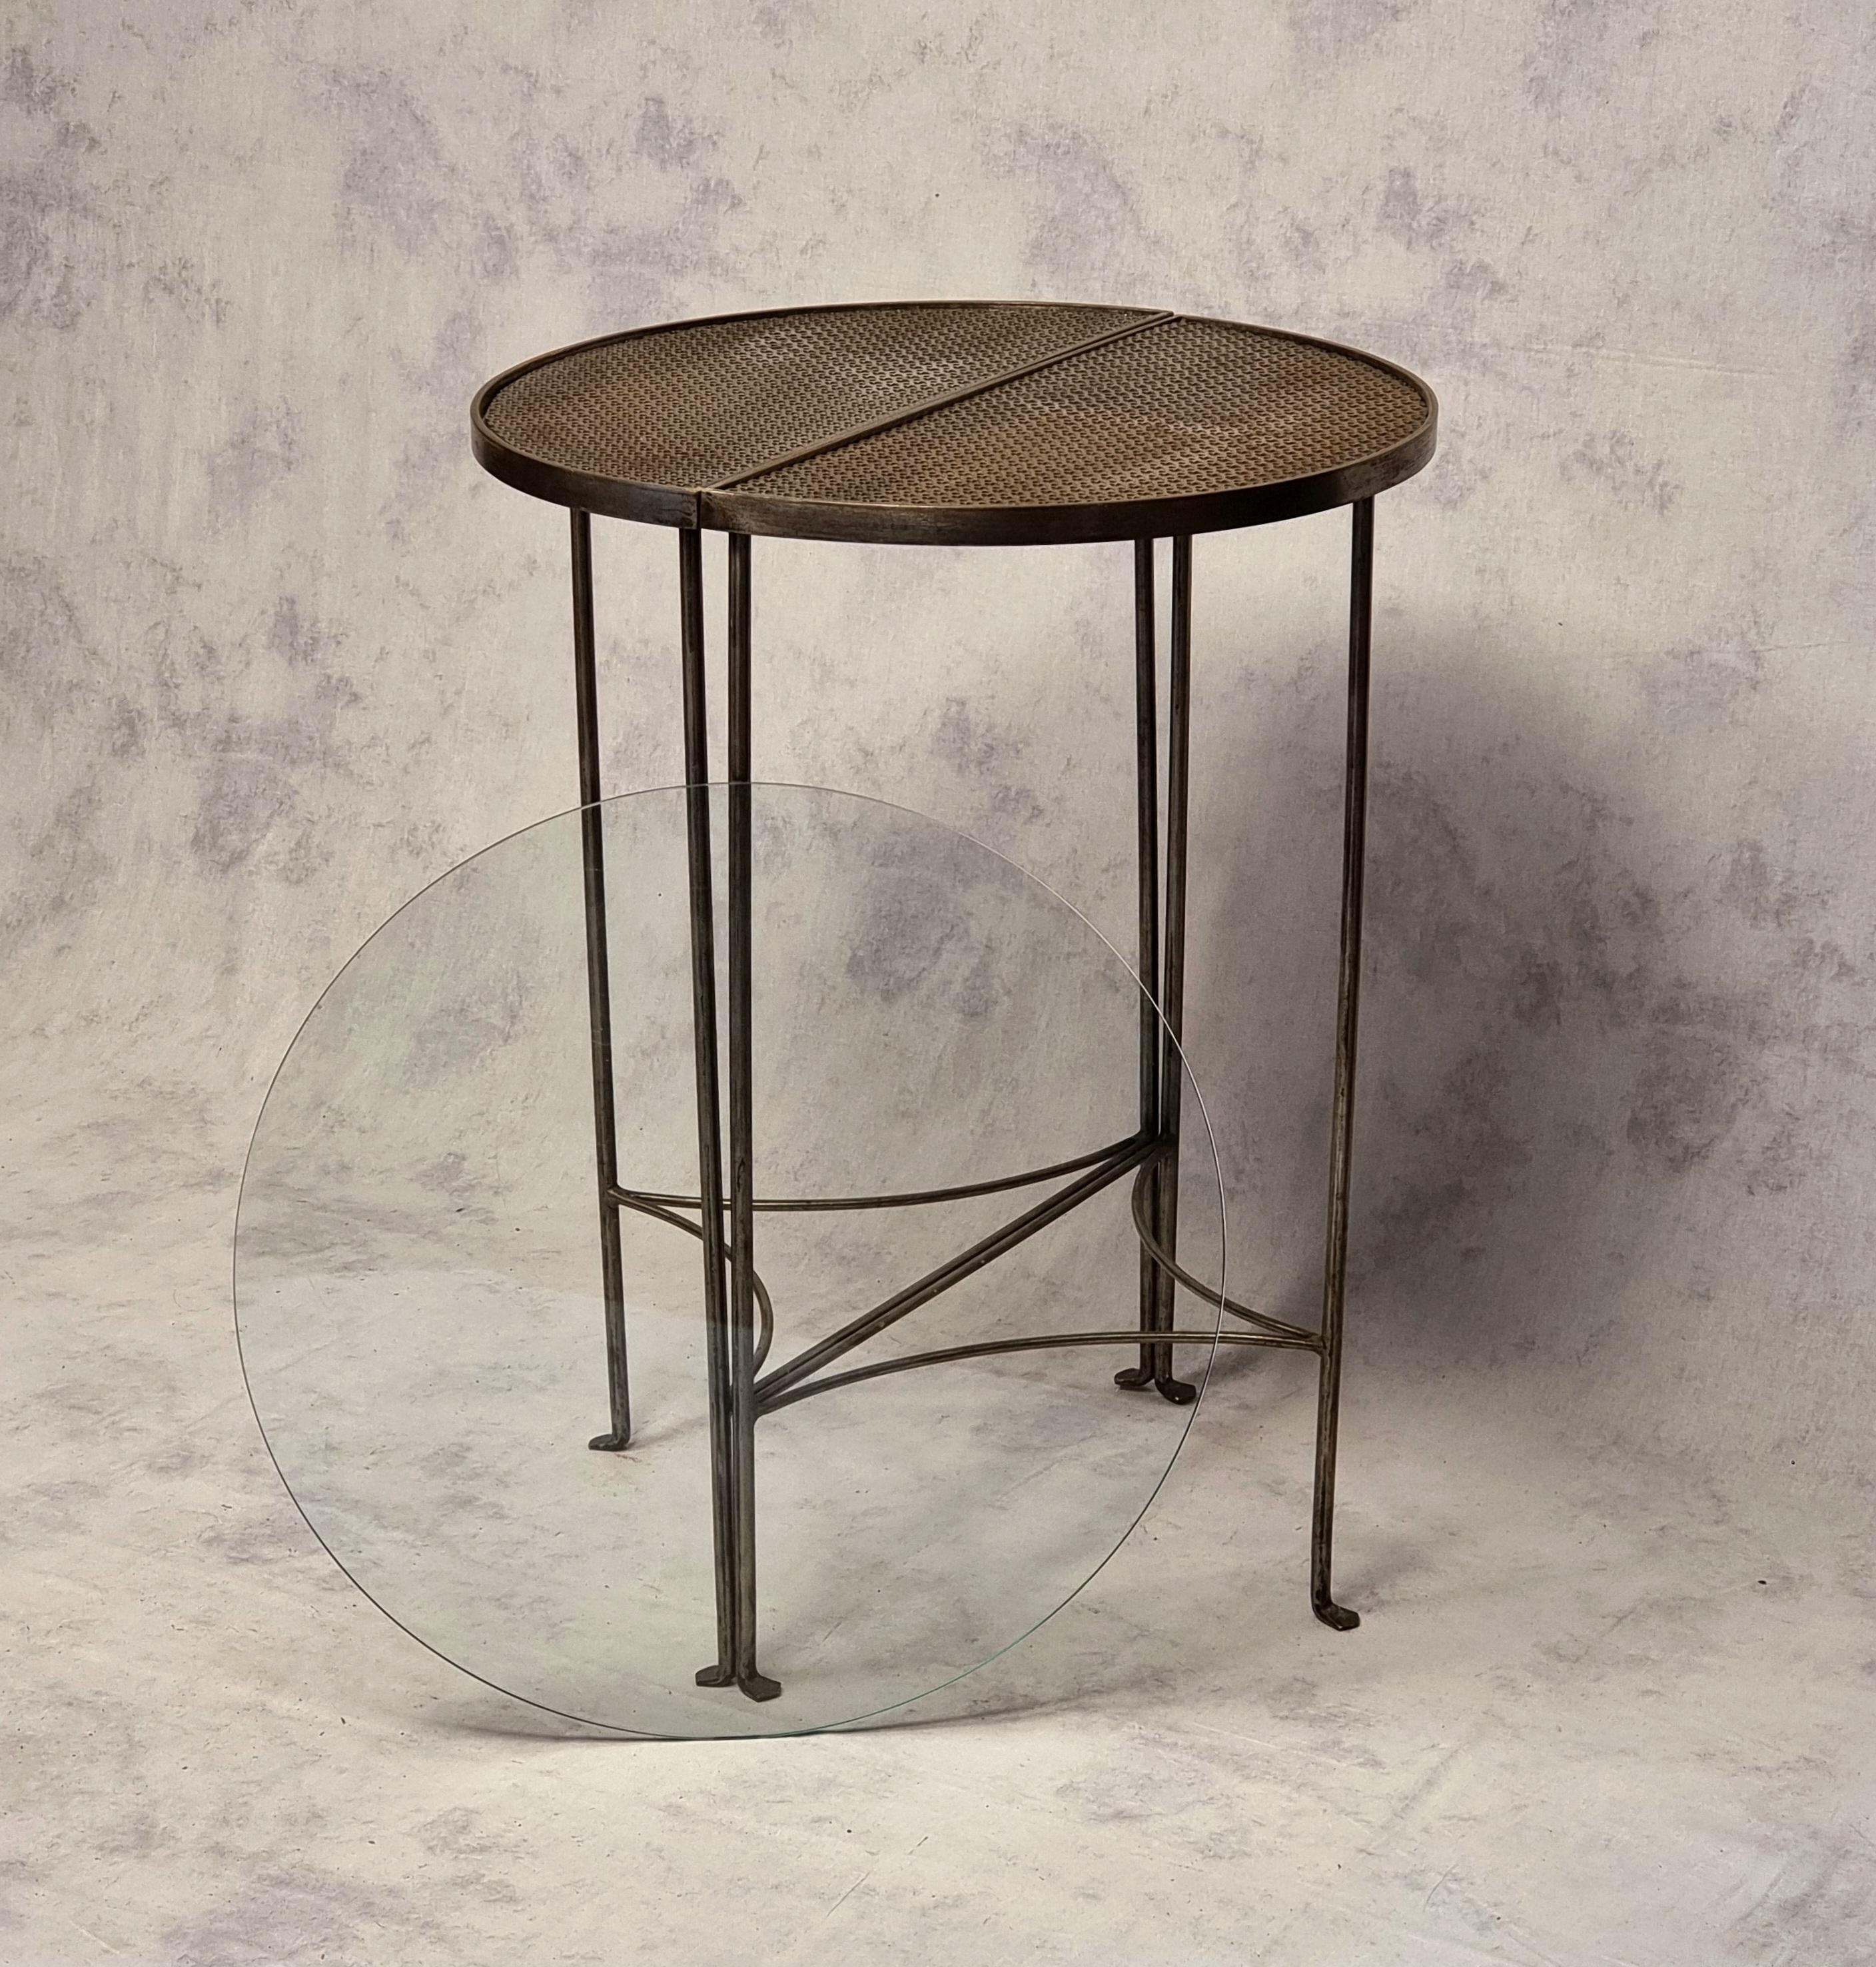 Pair of modernist style half-moon consoles forming a wrought iron pedestal table. Original and modular piece allowing these pieces to be presented separately in a half-moon console or joined together in a circular pedestal table. Pretty structure in